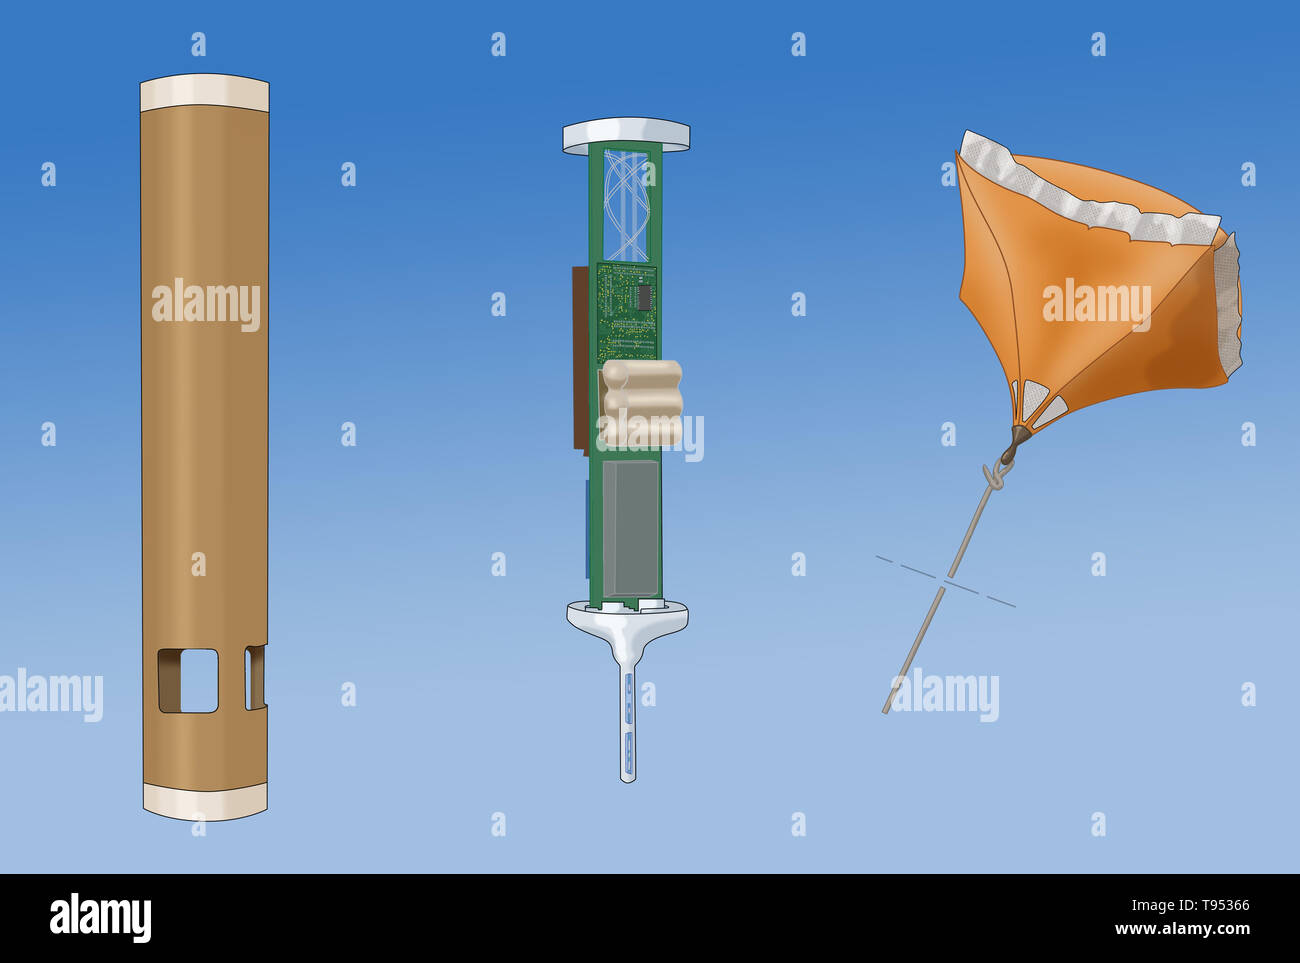 A dropsonde is an expendable weather reconnaissance device created by the National Center for Atmospheric Research (NCAR), designed to be dropped from an aircraft at altitude over water to measure (and therefore track) storm conditions as the device falls to the surface. Stock Photo